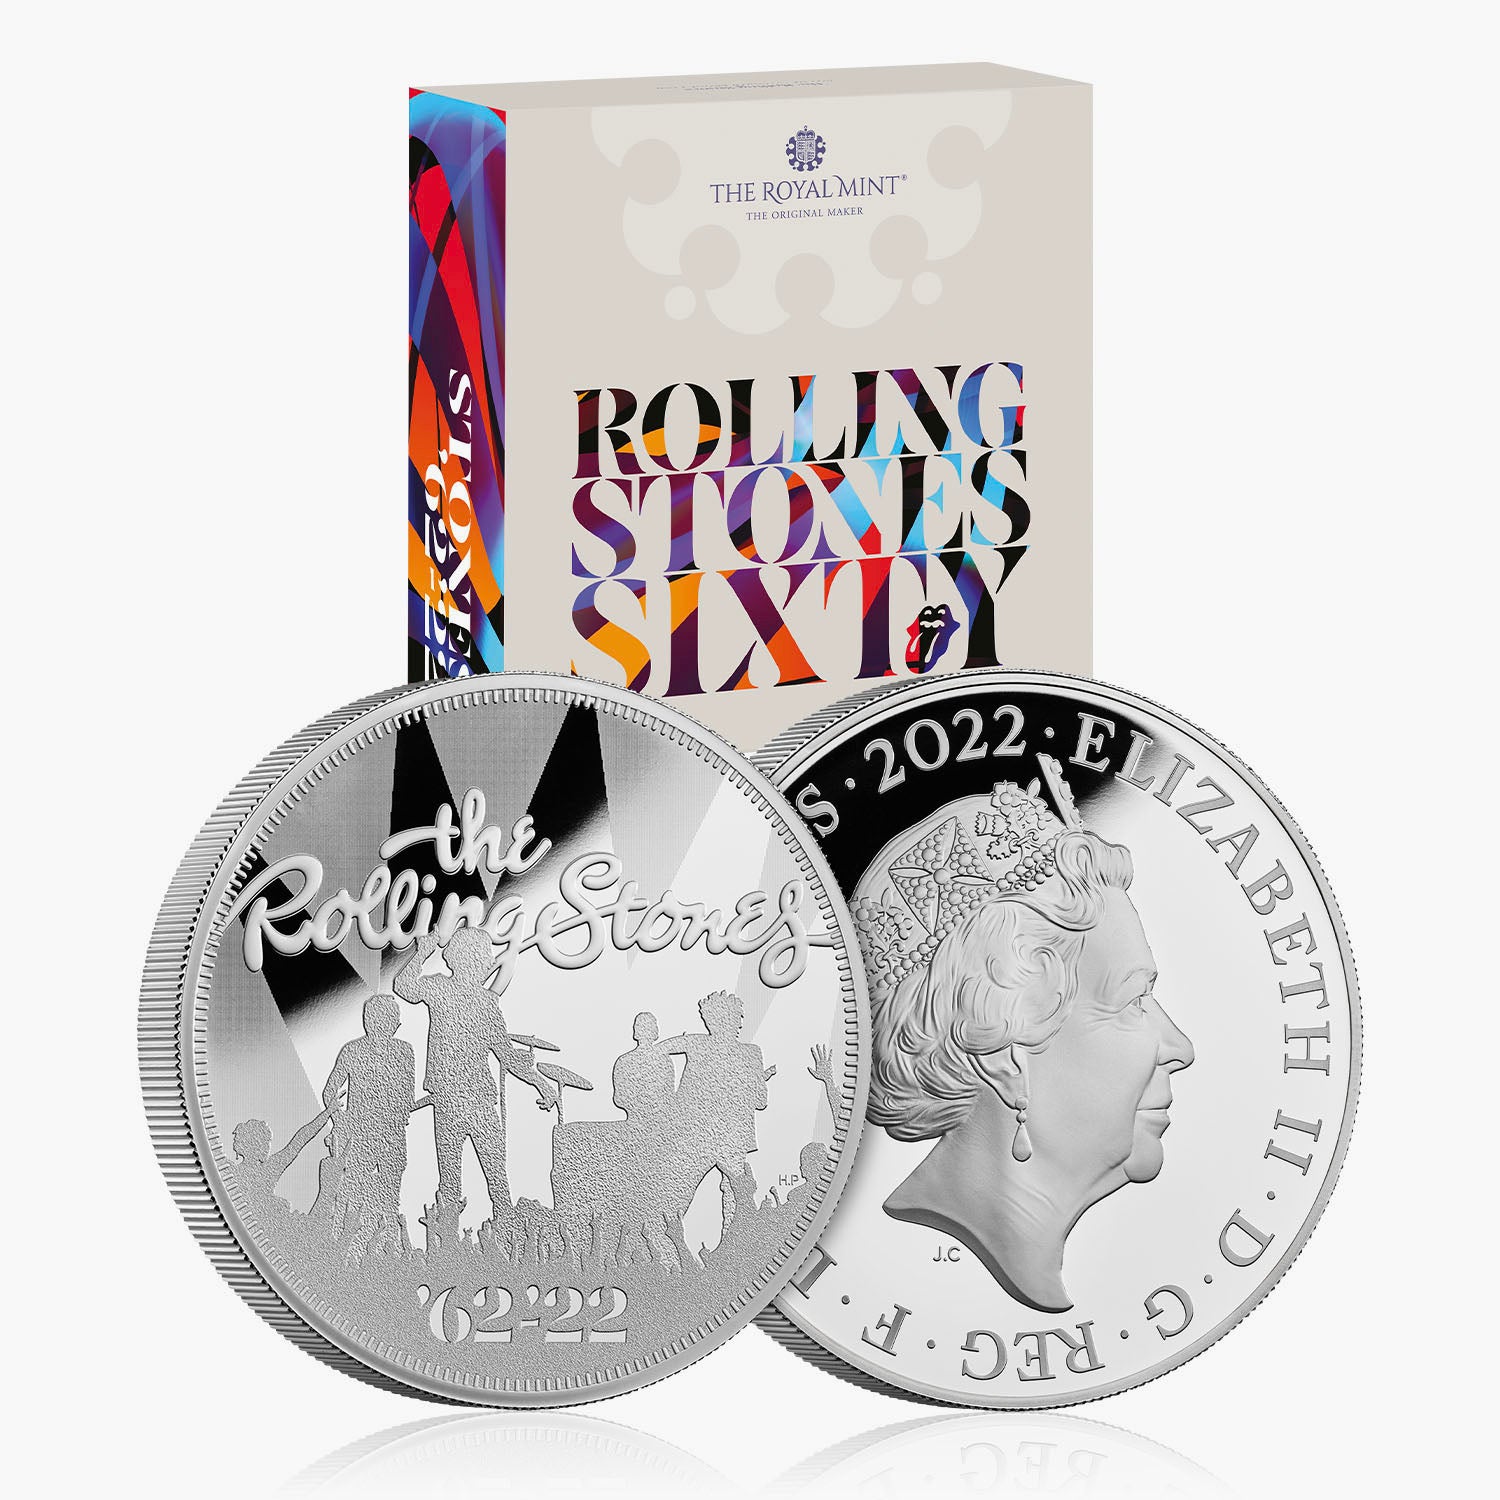 The Rolling Stones UK 2022 5oz Silver Proof Coin